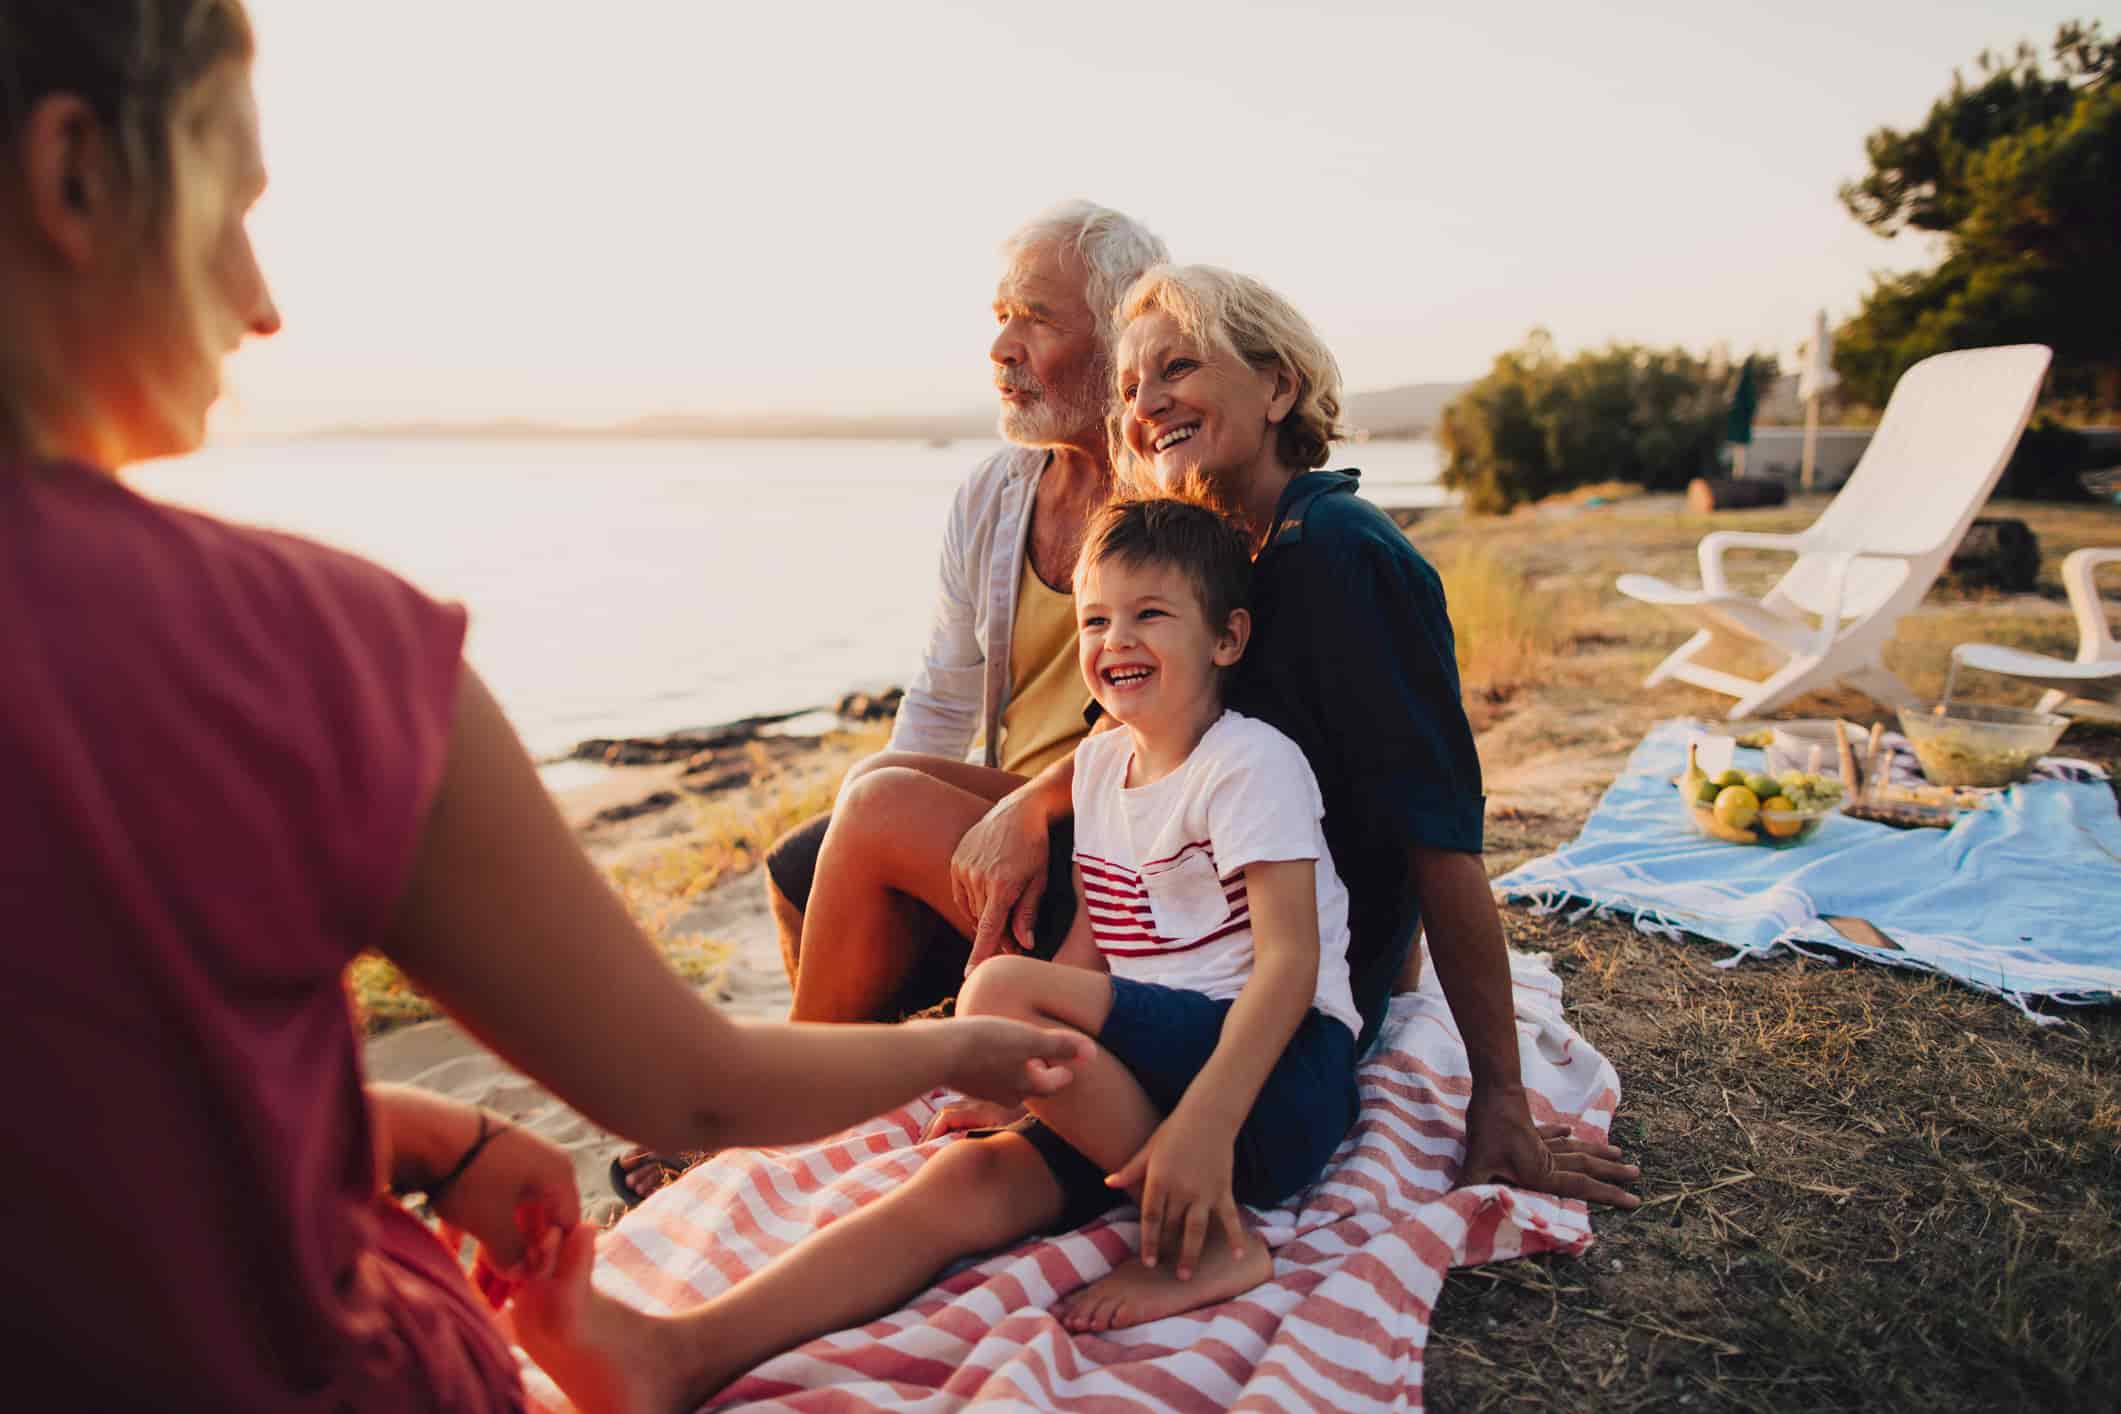 An attractive older couple sits on a picnic blanket by the sea with their daughter and grandson. They are all smiling, and the man looks out at the sea